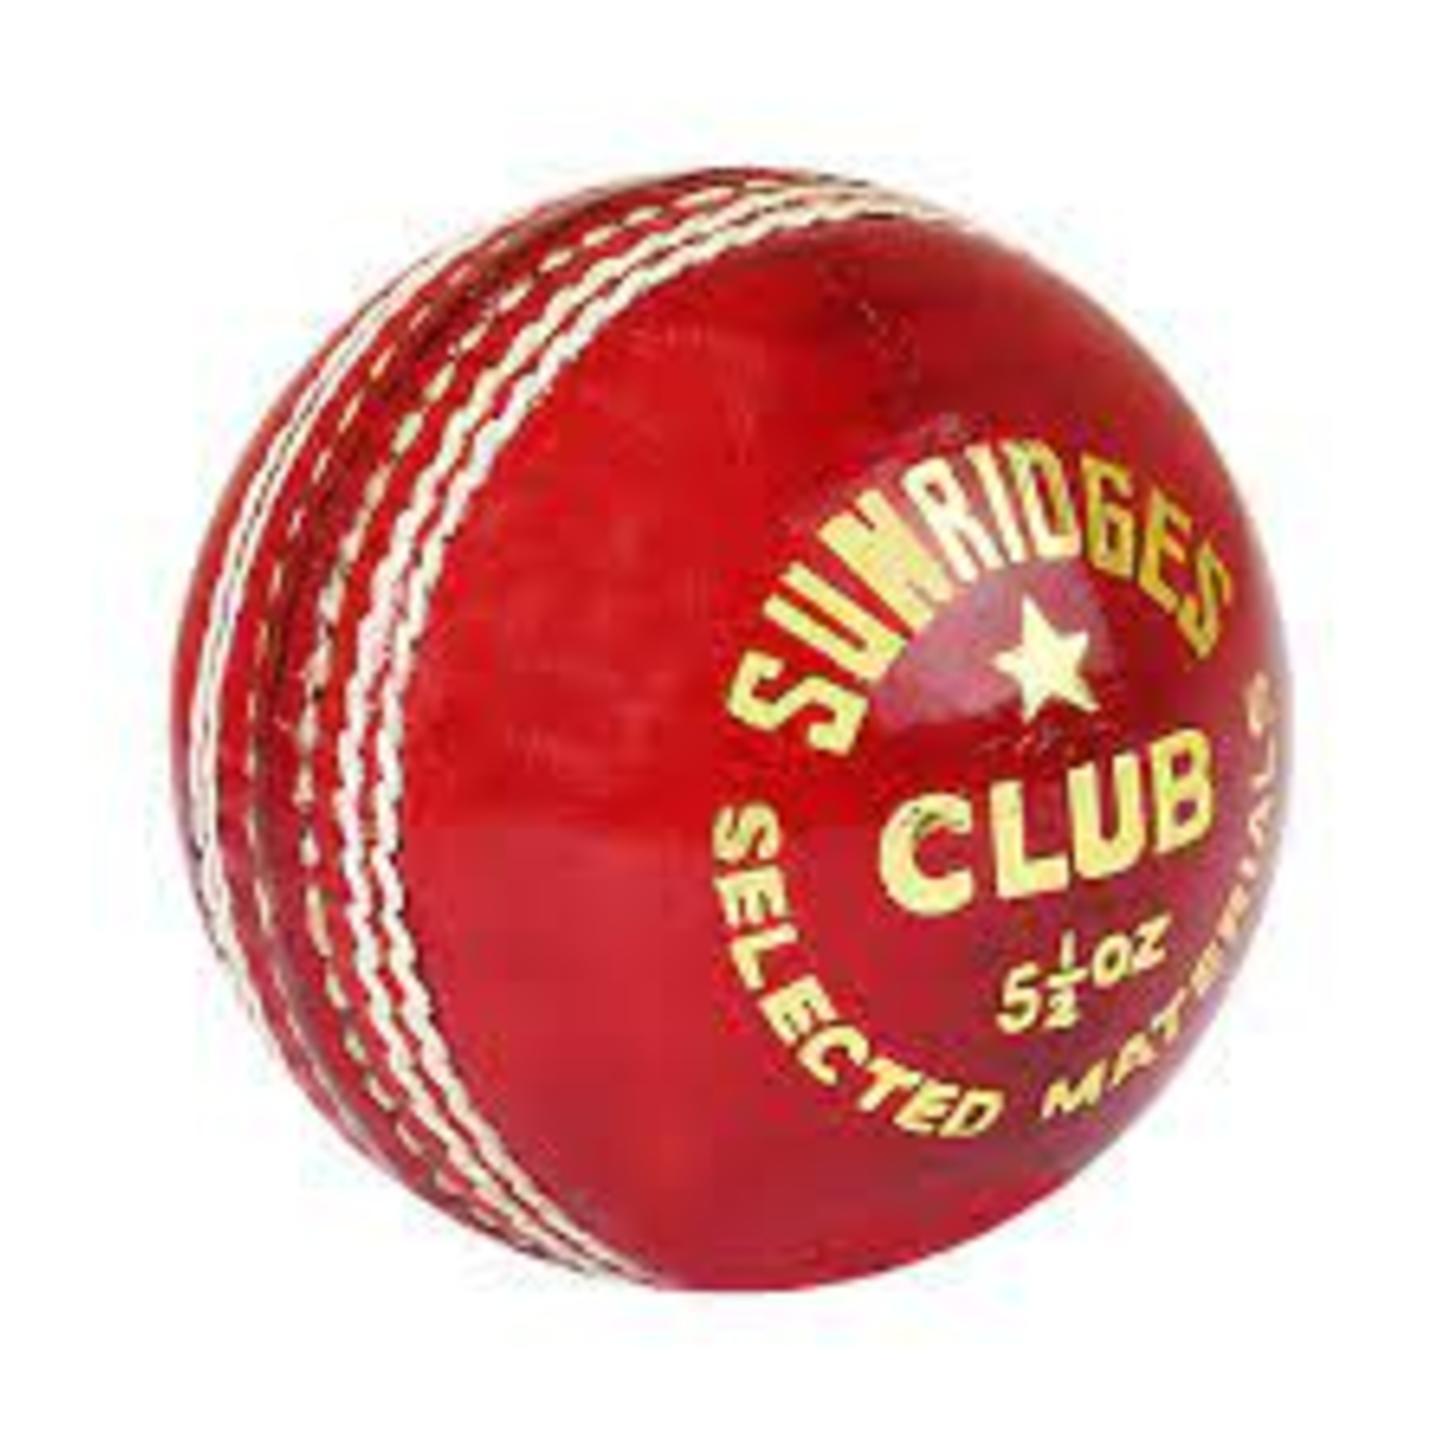 SS CLUB 4 PC. LEATHER CRICKET BALL